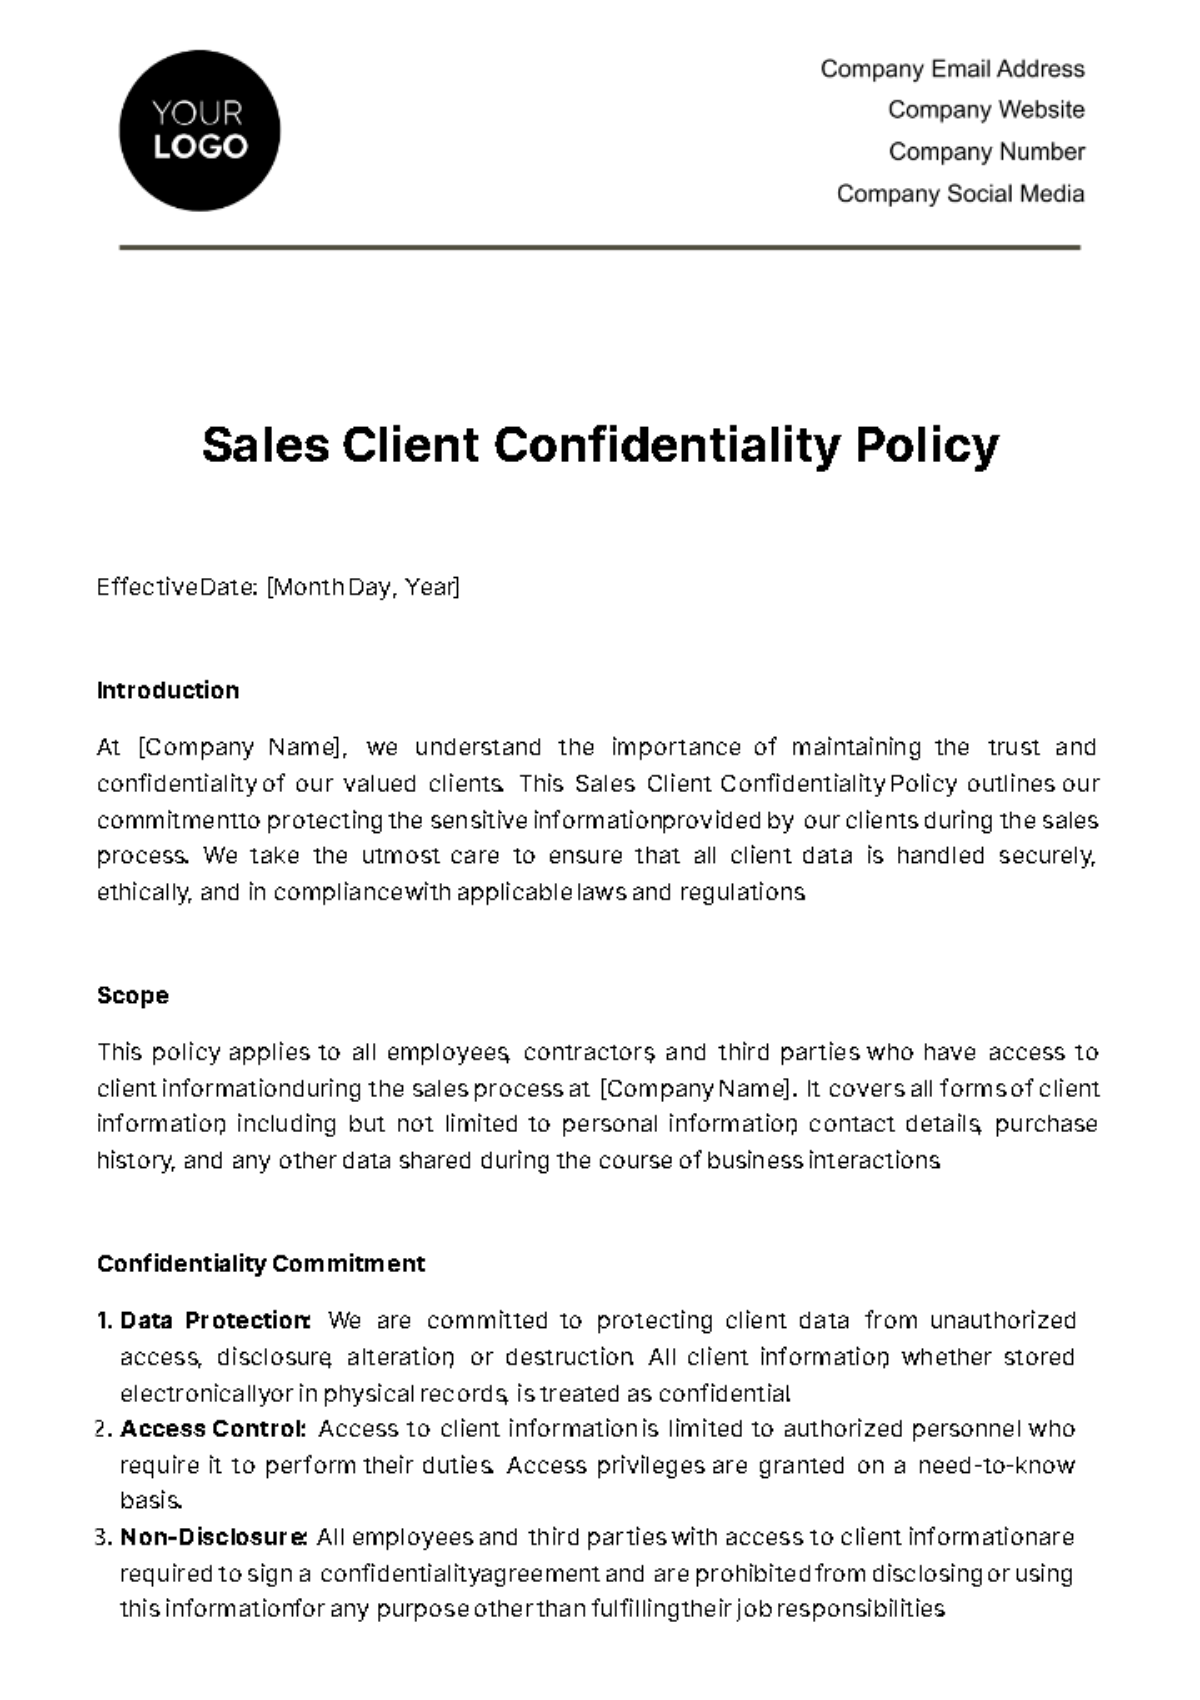 Sales Client Confidentiality Policy Template